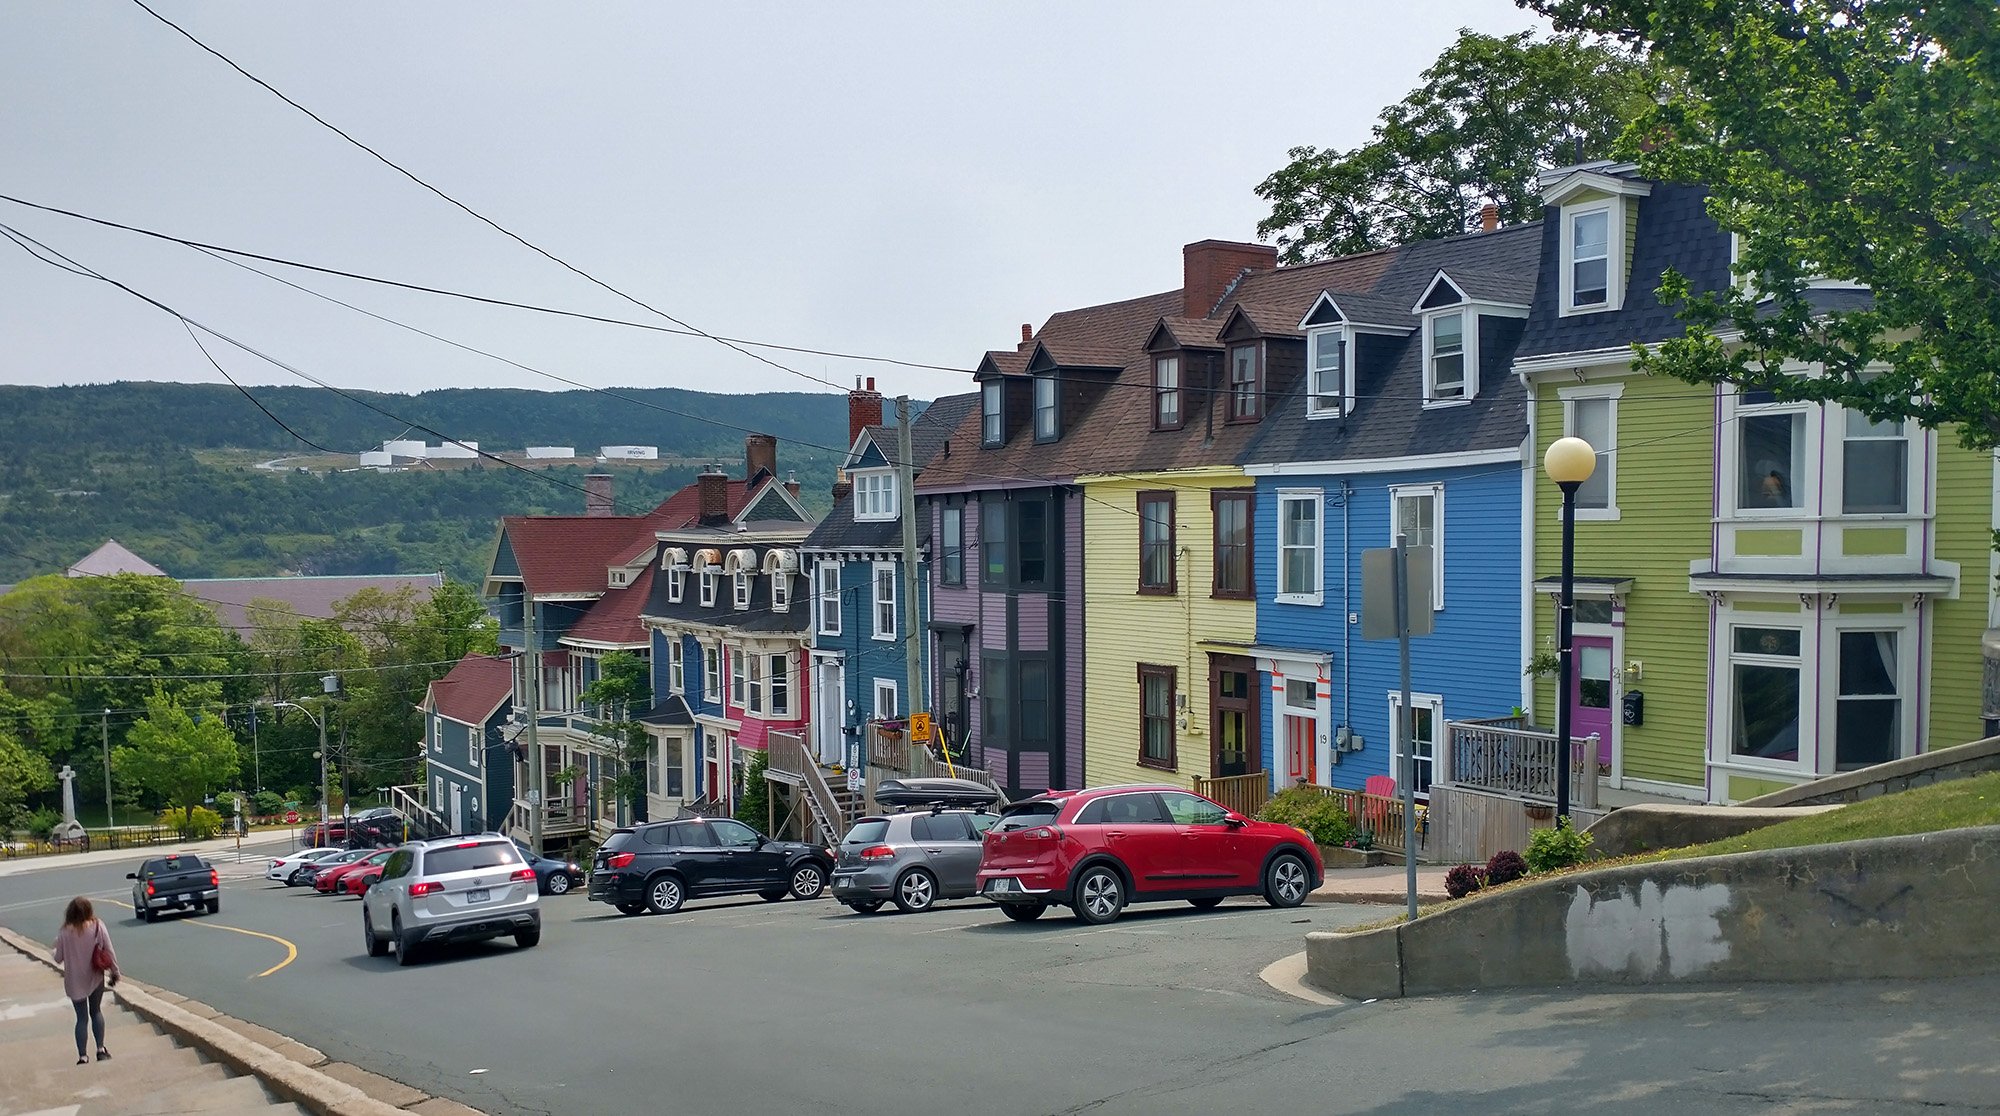 St John's has a real San Francisco feel to it, with all these old colorful buildings on extremely steep streets.